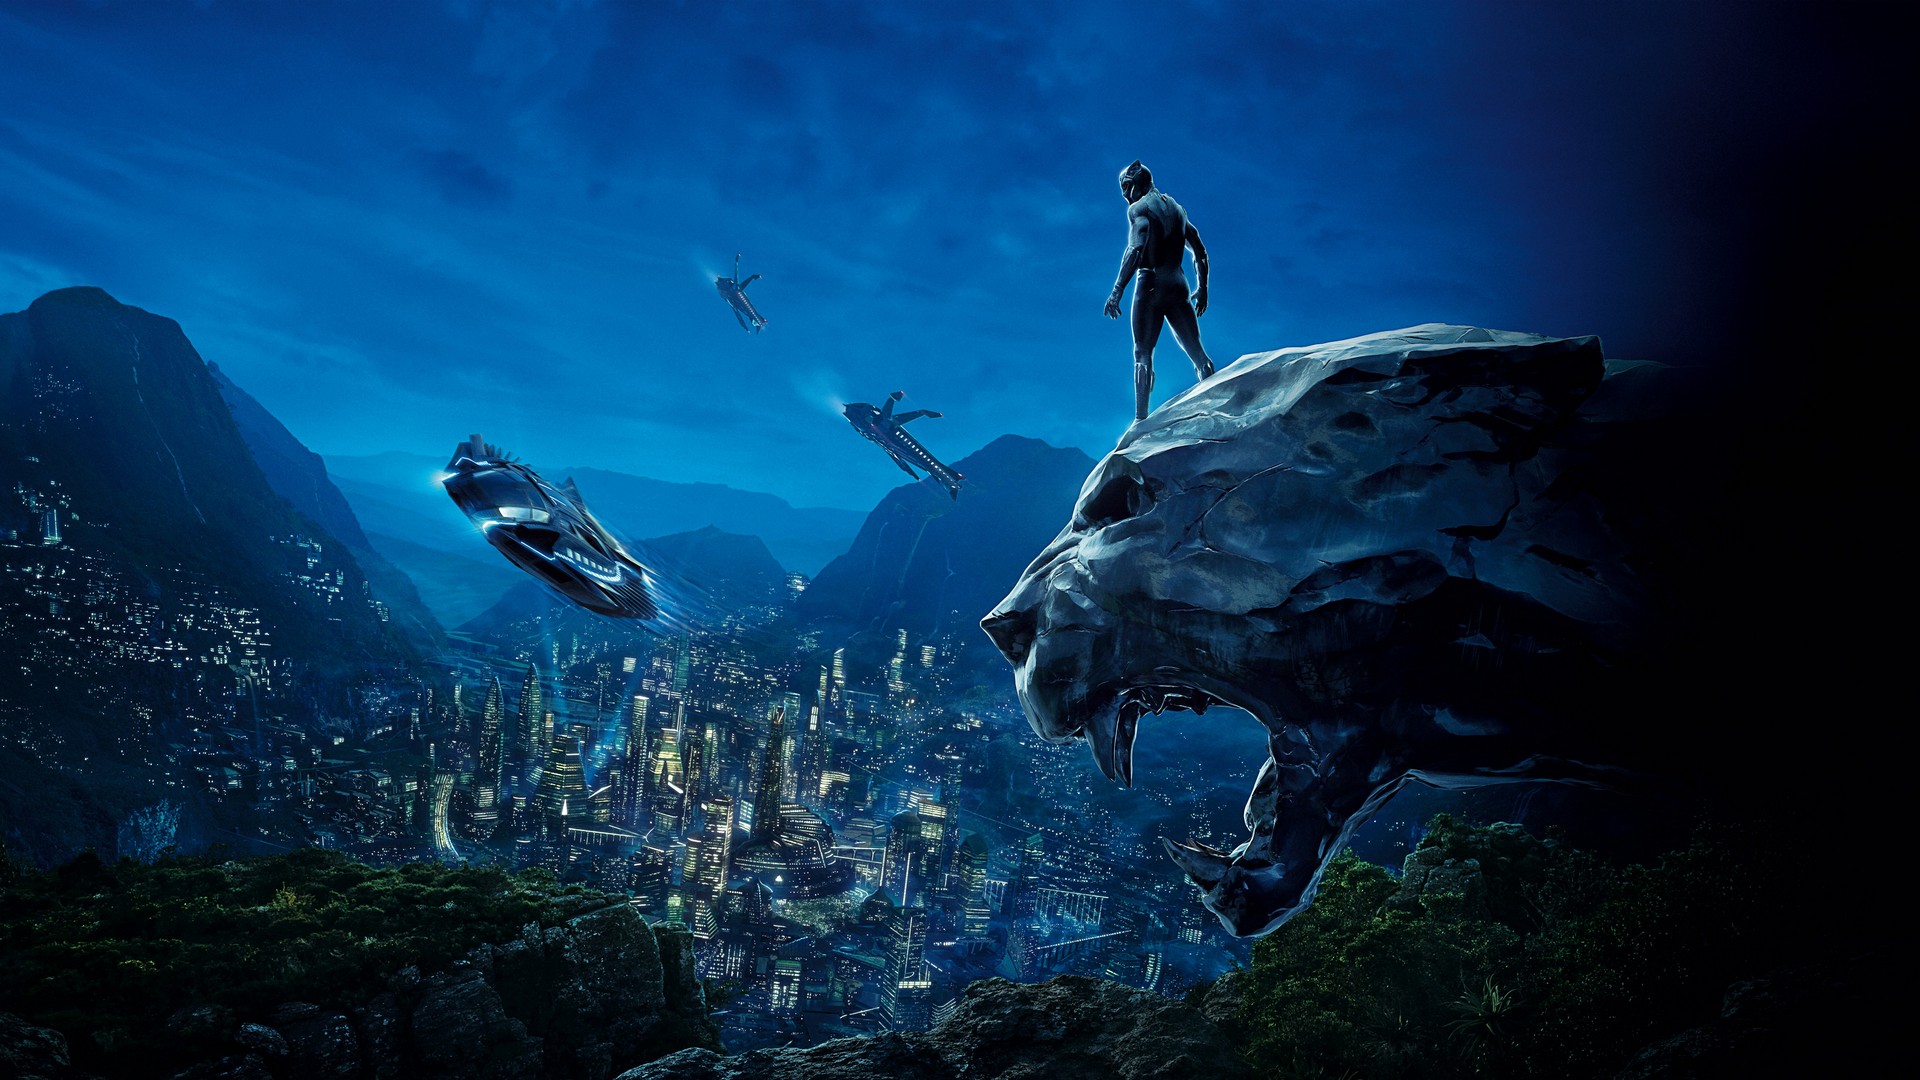 Black Panther Movie Trailer Wallpaper with high-resolution 1920x1080 pixel. You can use this poster wallpaper for your Desktop Computers, Mac Screensavers, Windows Backgrounds, iPhone Wallpapers, Tablet or Android Lock screen and another Mobile device